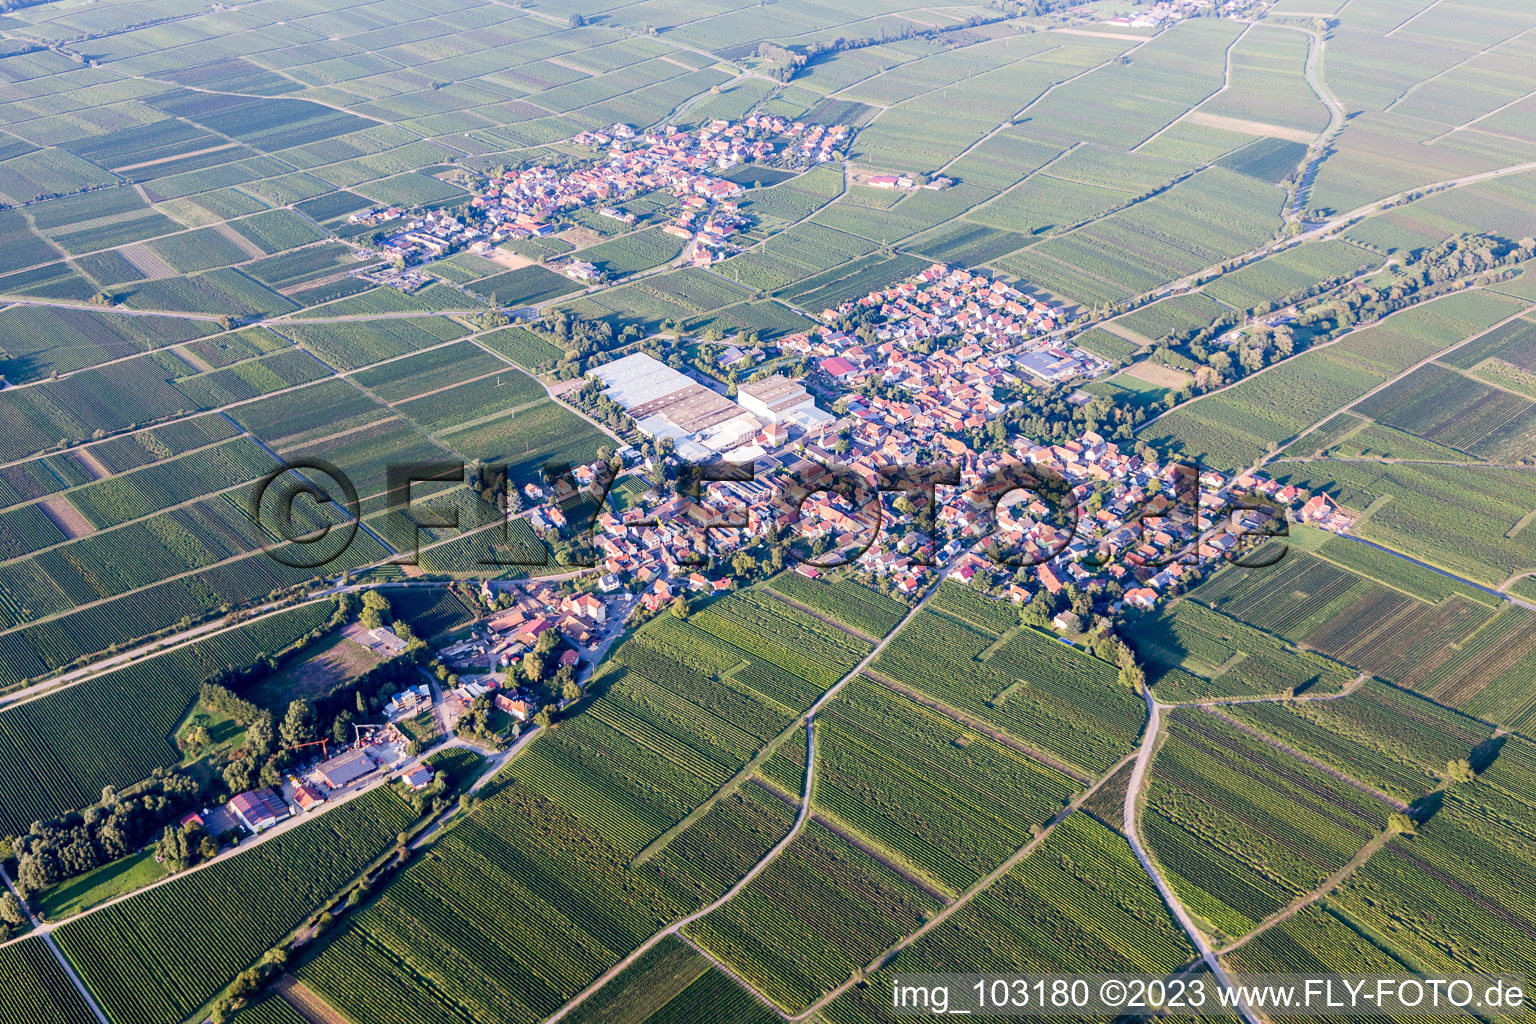 Böchingen in the state Rhineland-Palatinate, Germany from above